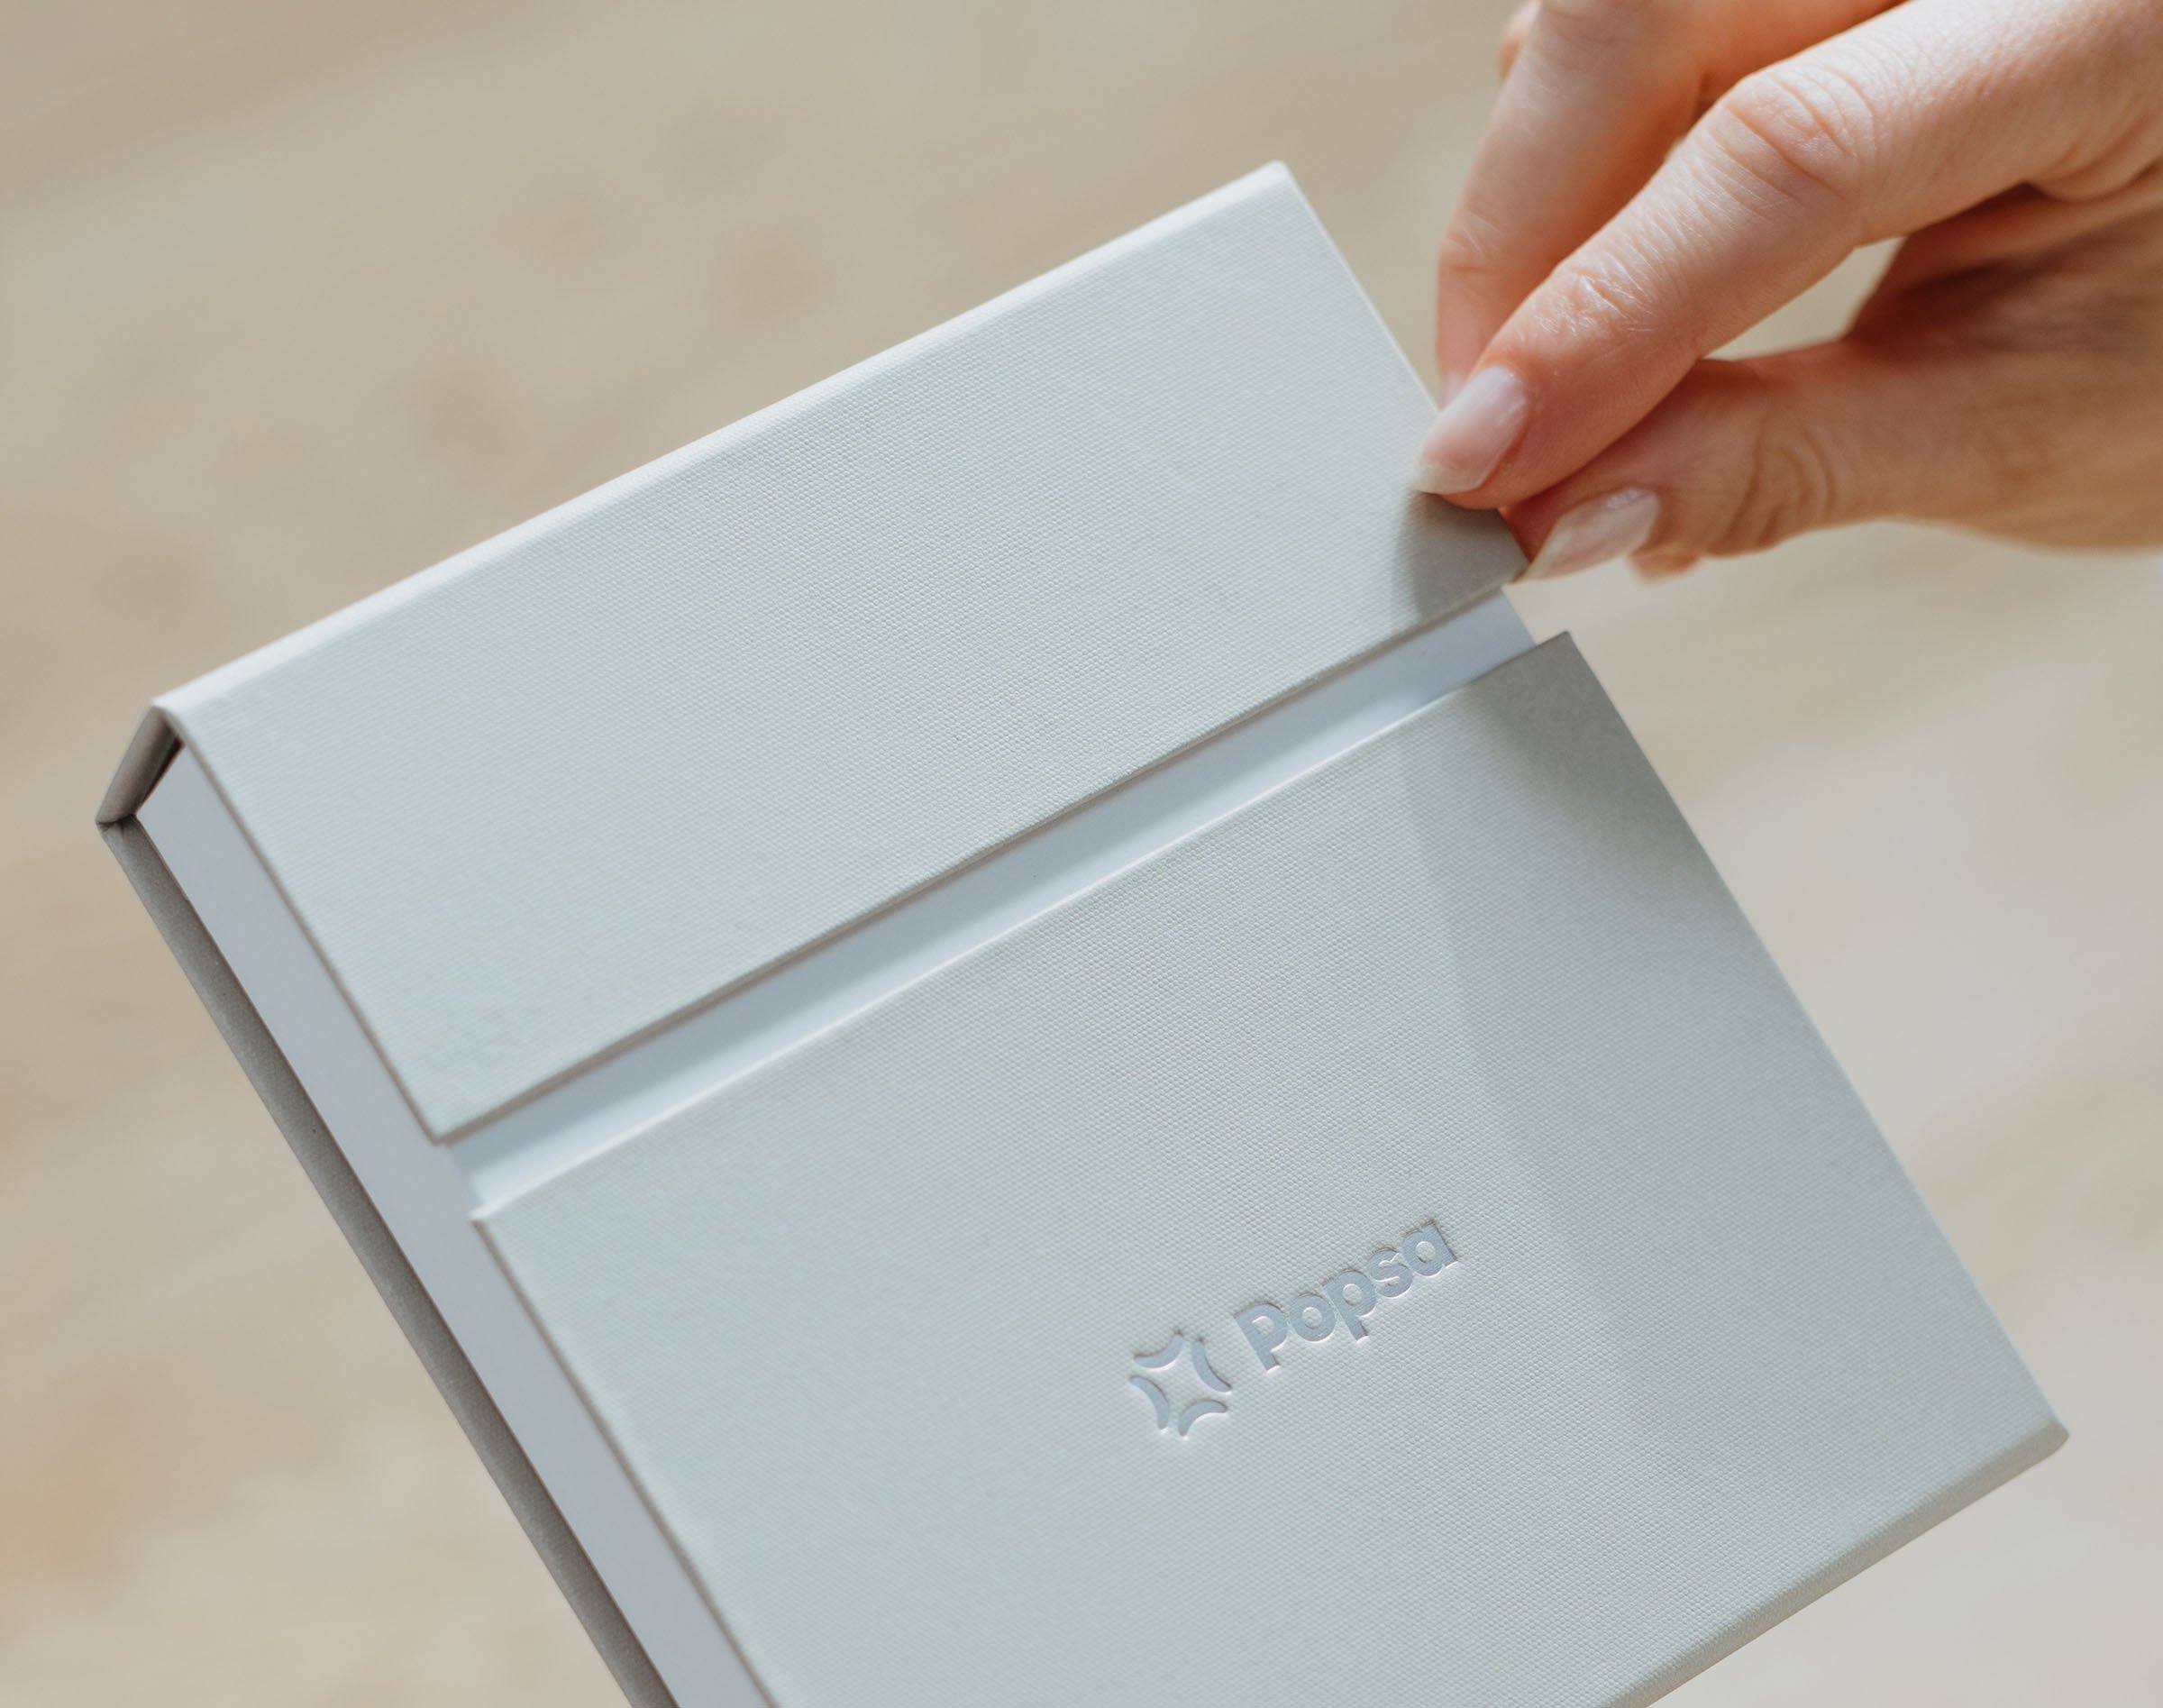 Introducing Photo Boxes by Popsa: A New Way To Present Your Memories